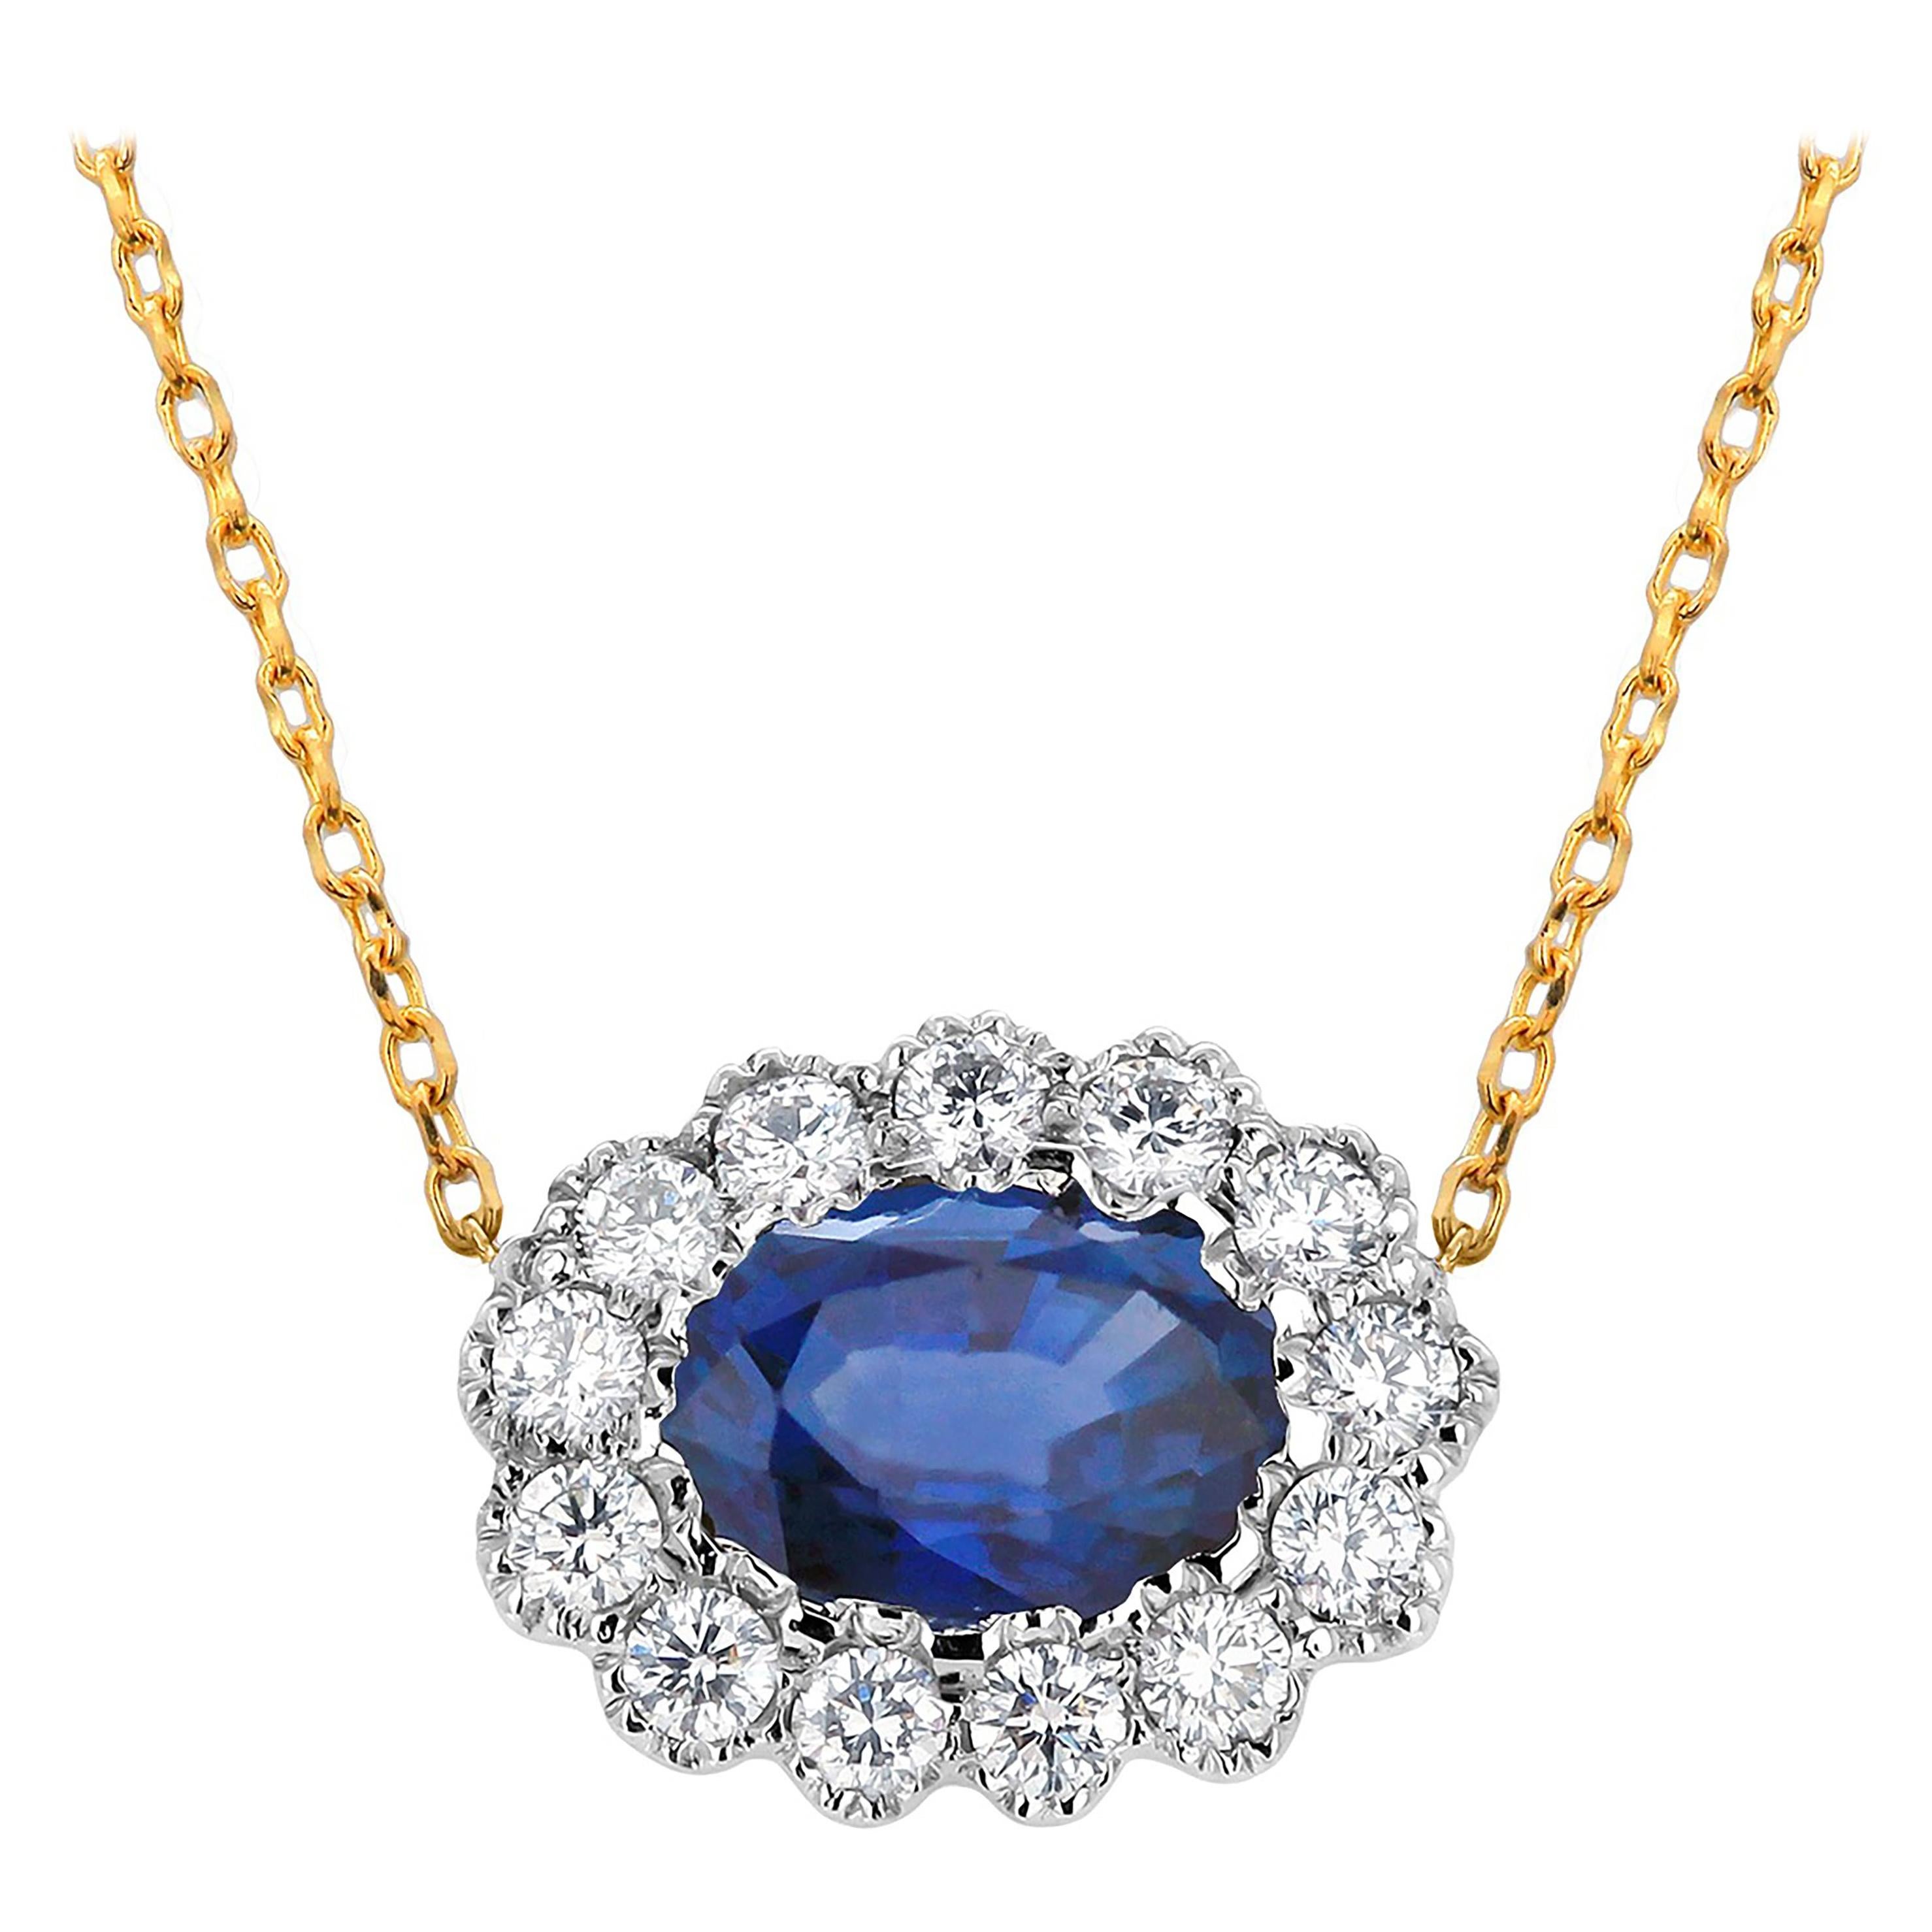 Oval Sapphire Surrounded by Diamonds Gold Layered Necklace Pendant